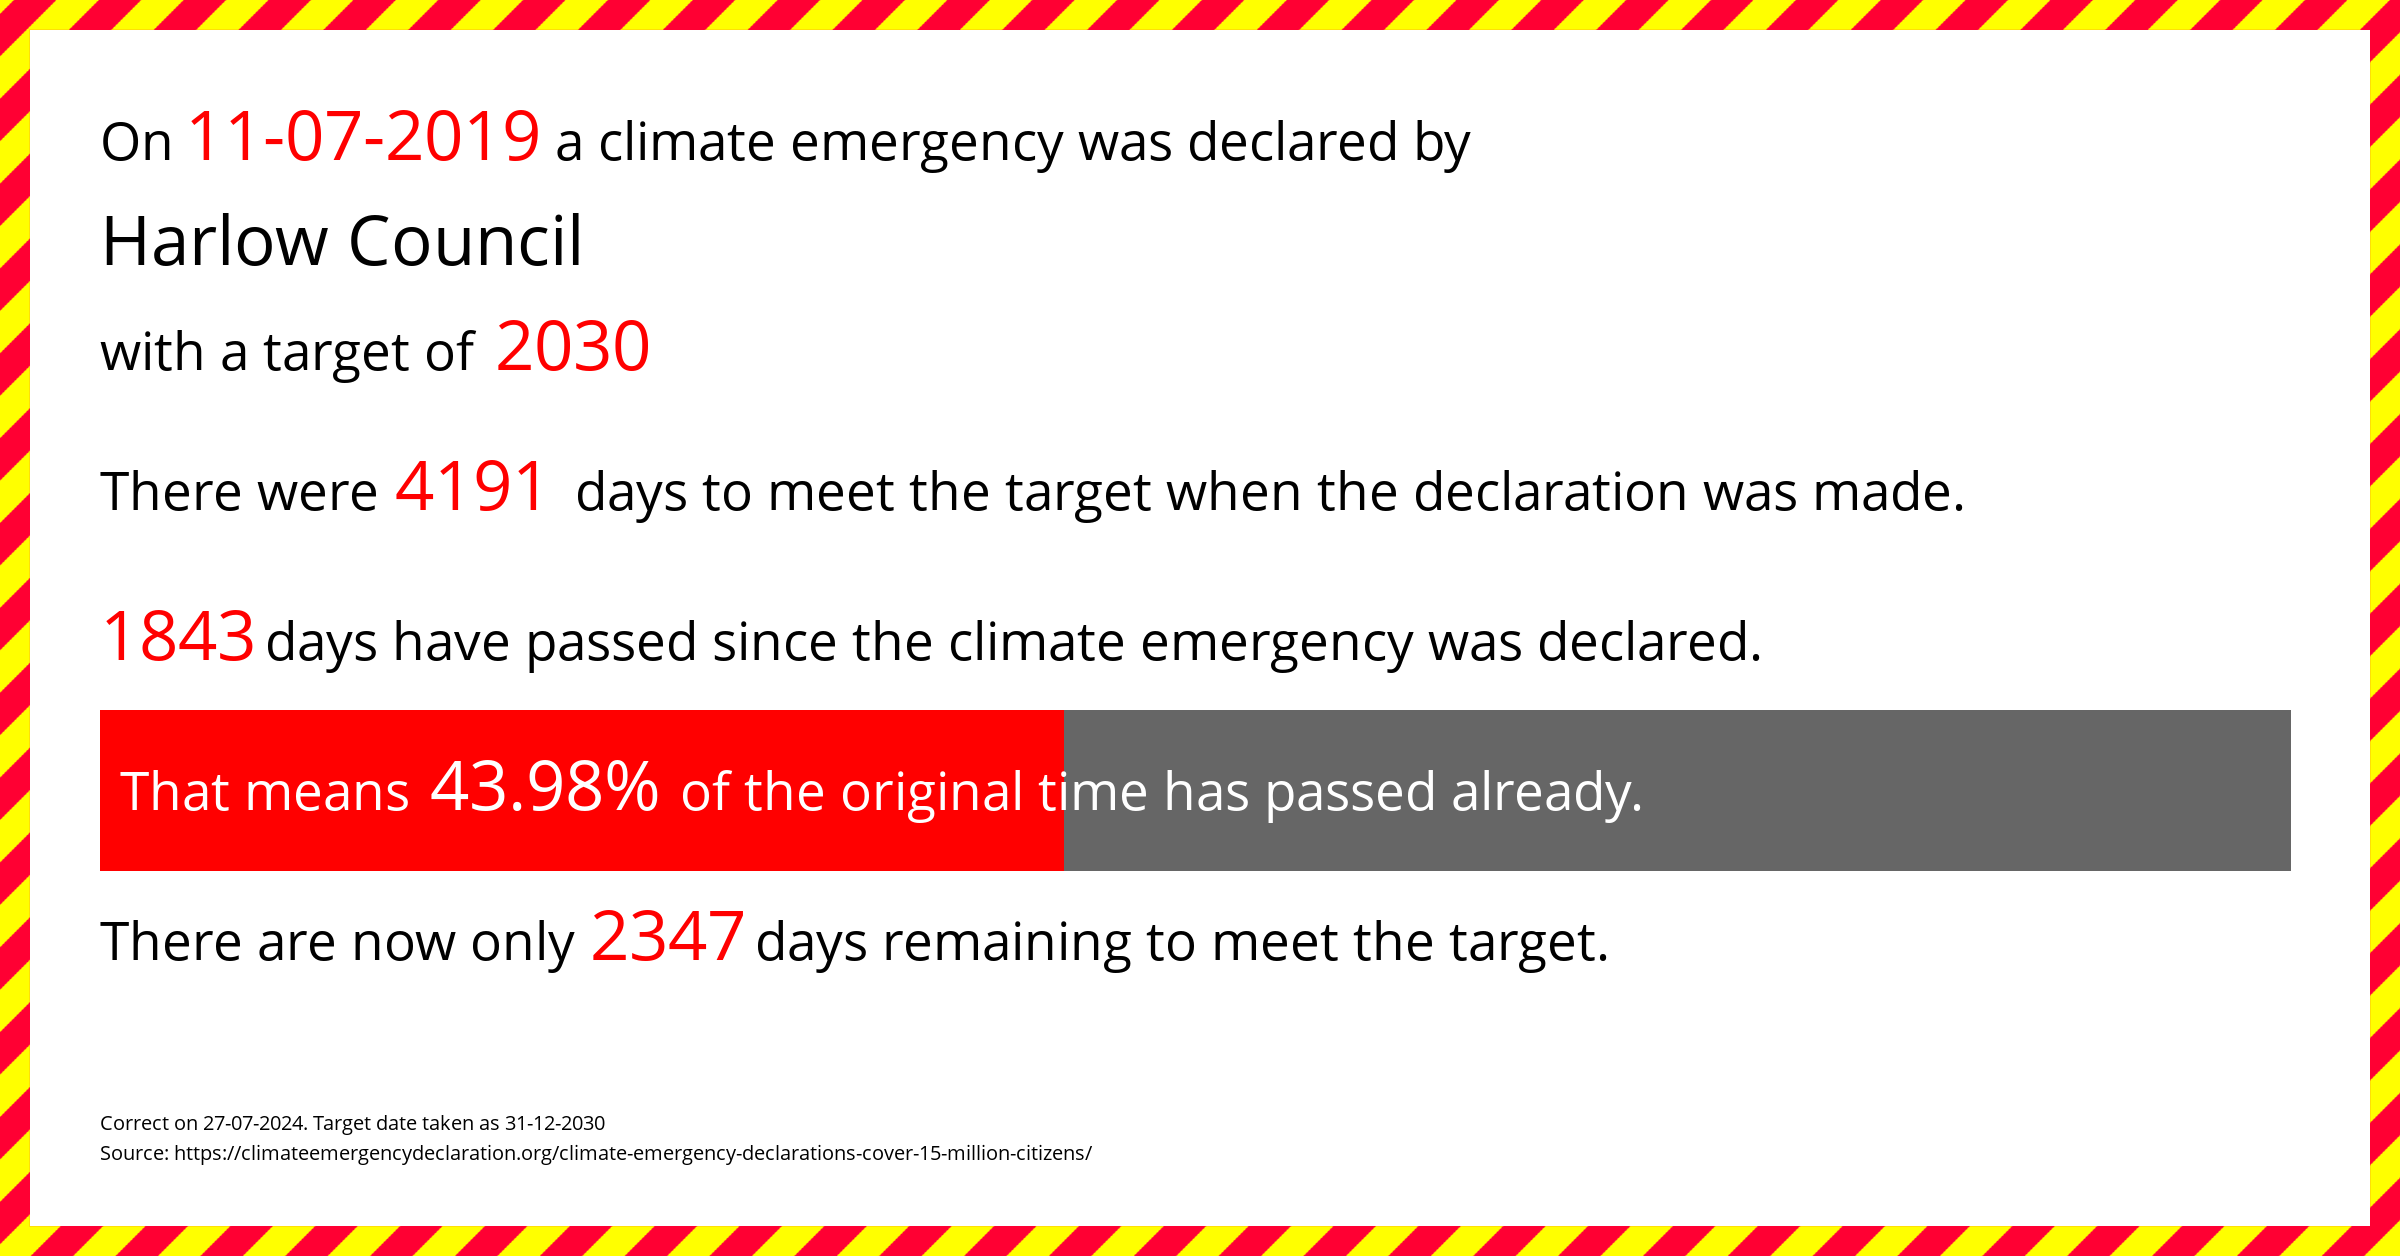 Harlow Council declared a Climate emergency on Thursday 11th July 2019, with a target of 2030.